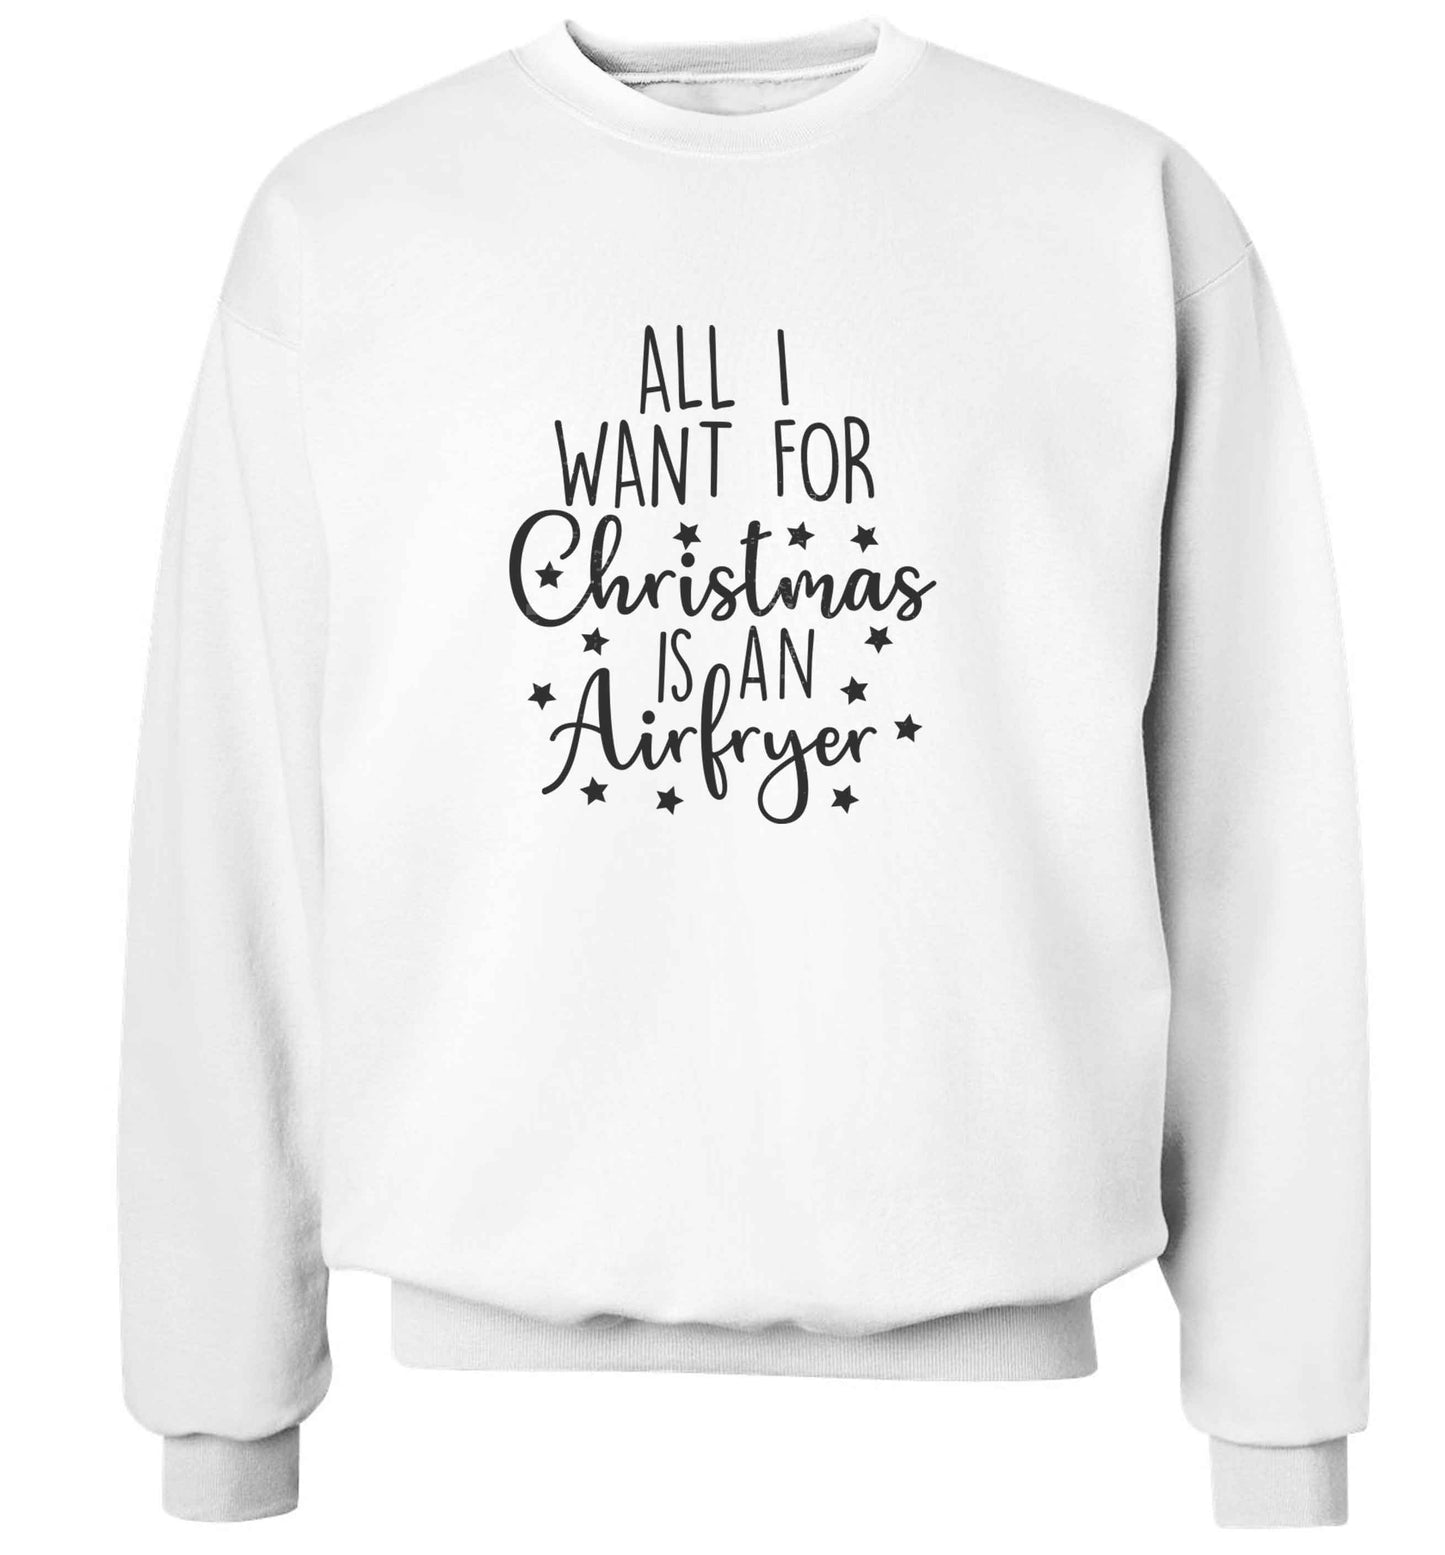 All I want for Christmas is an airfryeradult's unisex white sweater 2XL